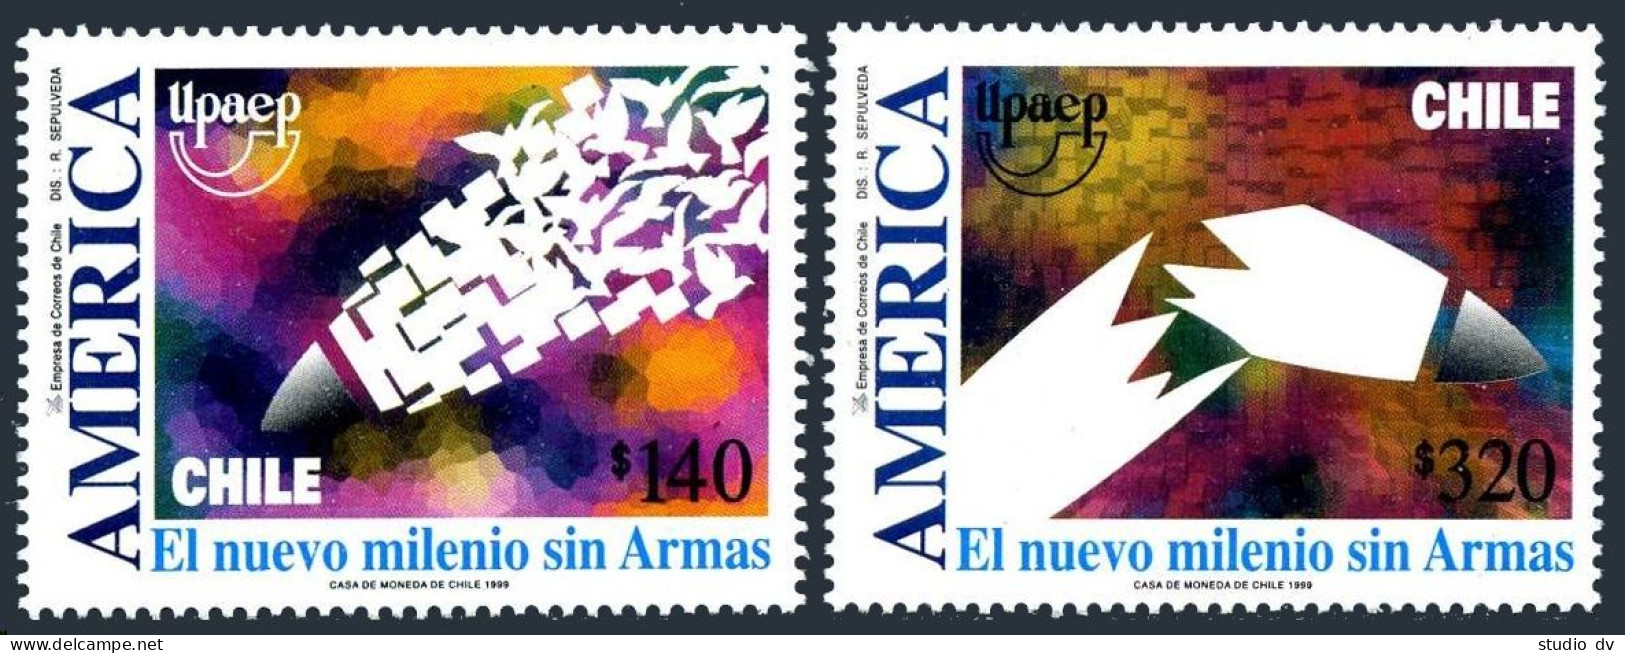 Chile 1304-1305,MNH. America UPAEP-1999.New Millennium Without Arms.Broken Bomb. - Cile